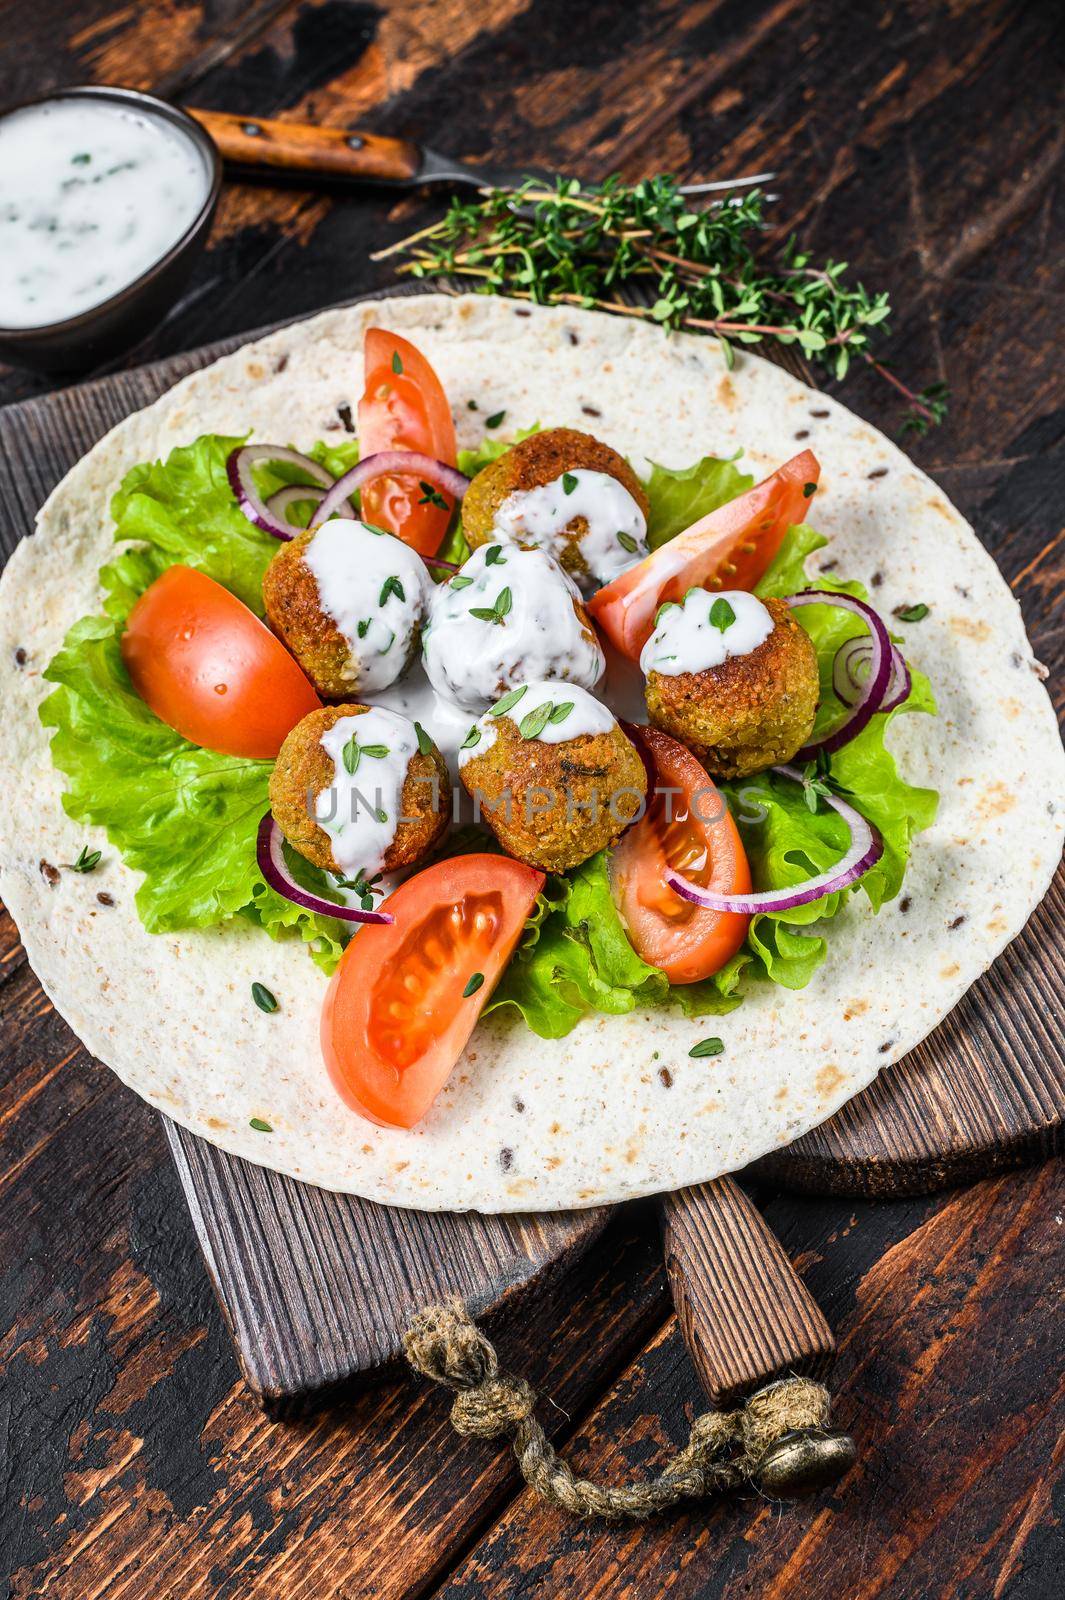 Vegetarian falafel with vegetables and tzatziki sauce on a tortilla bread. Dark wooden background. Top view.